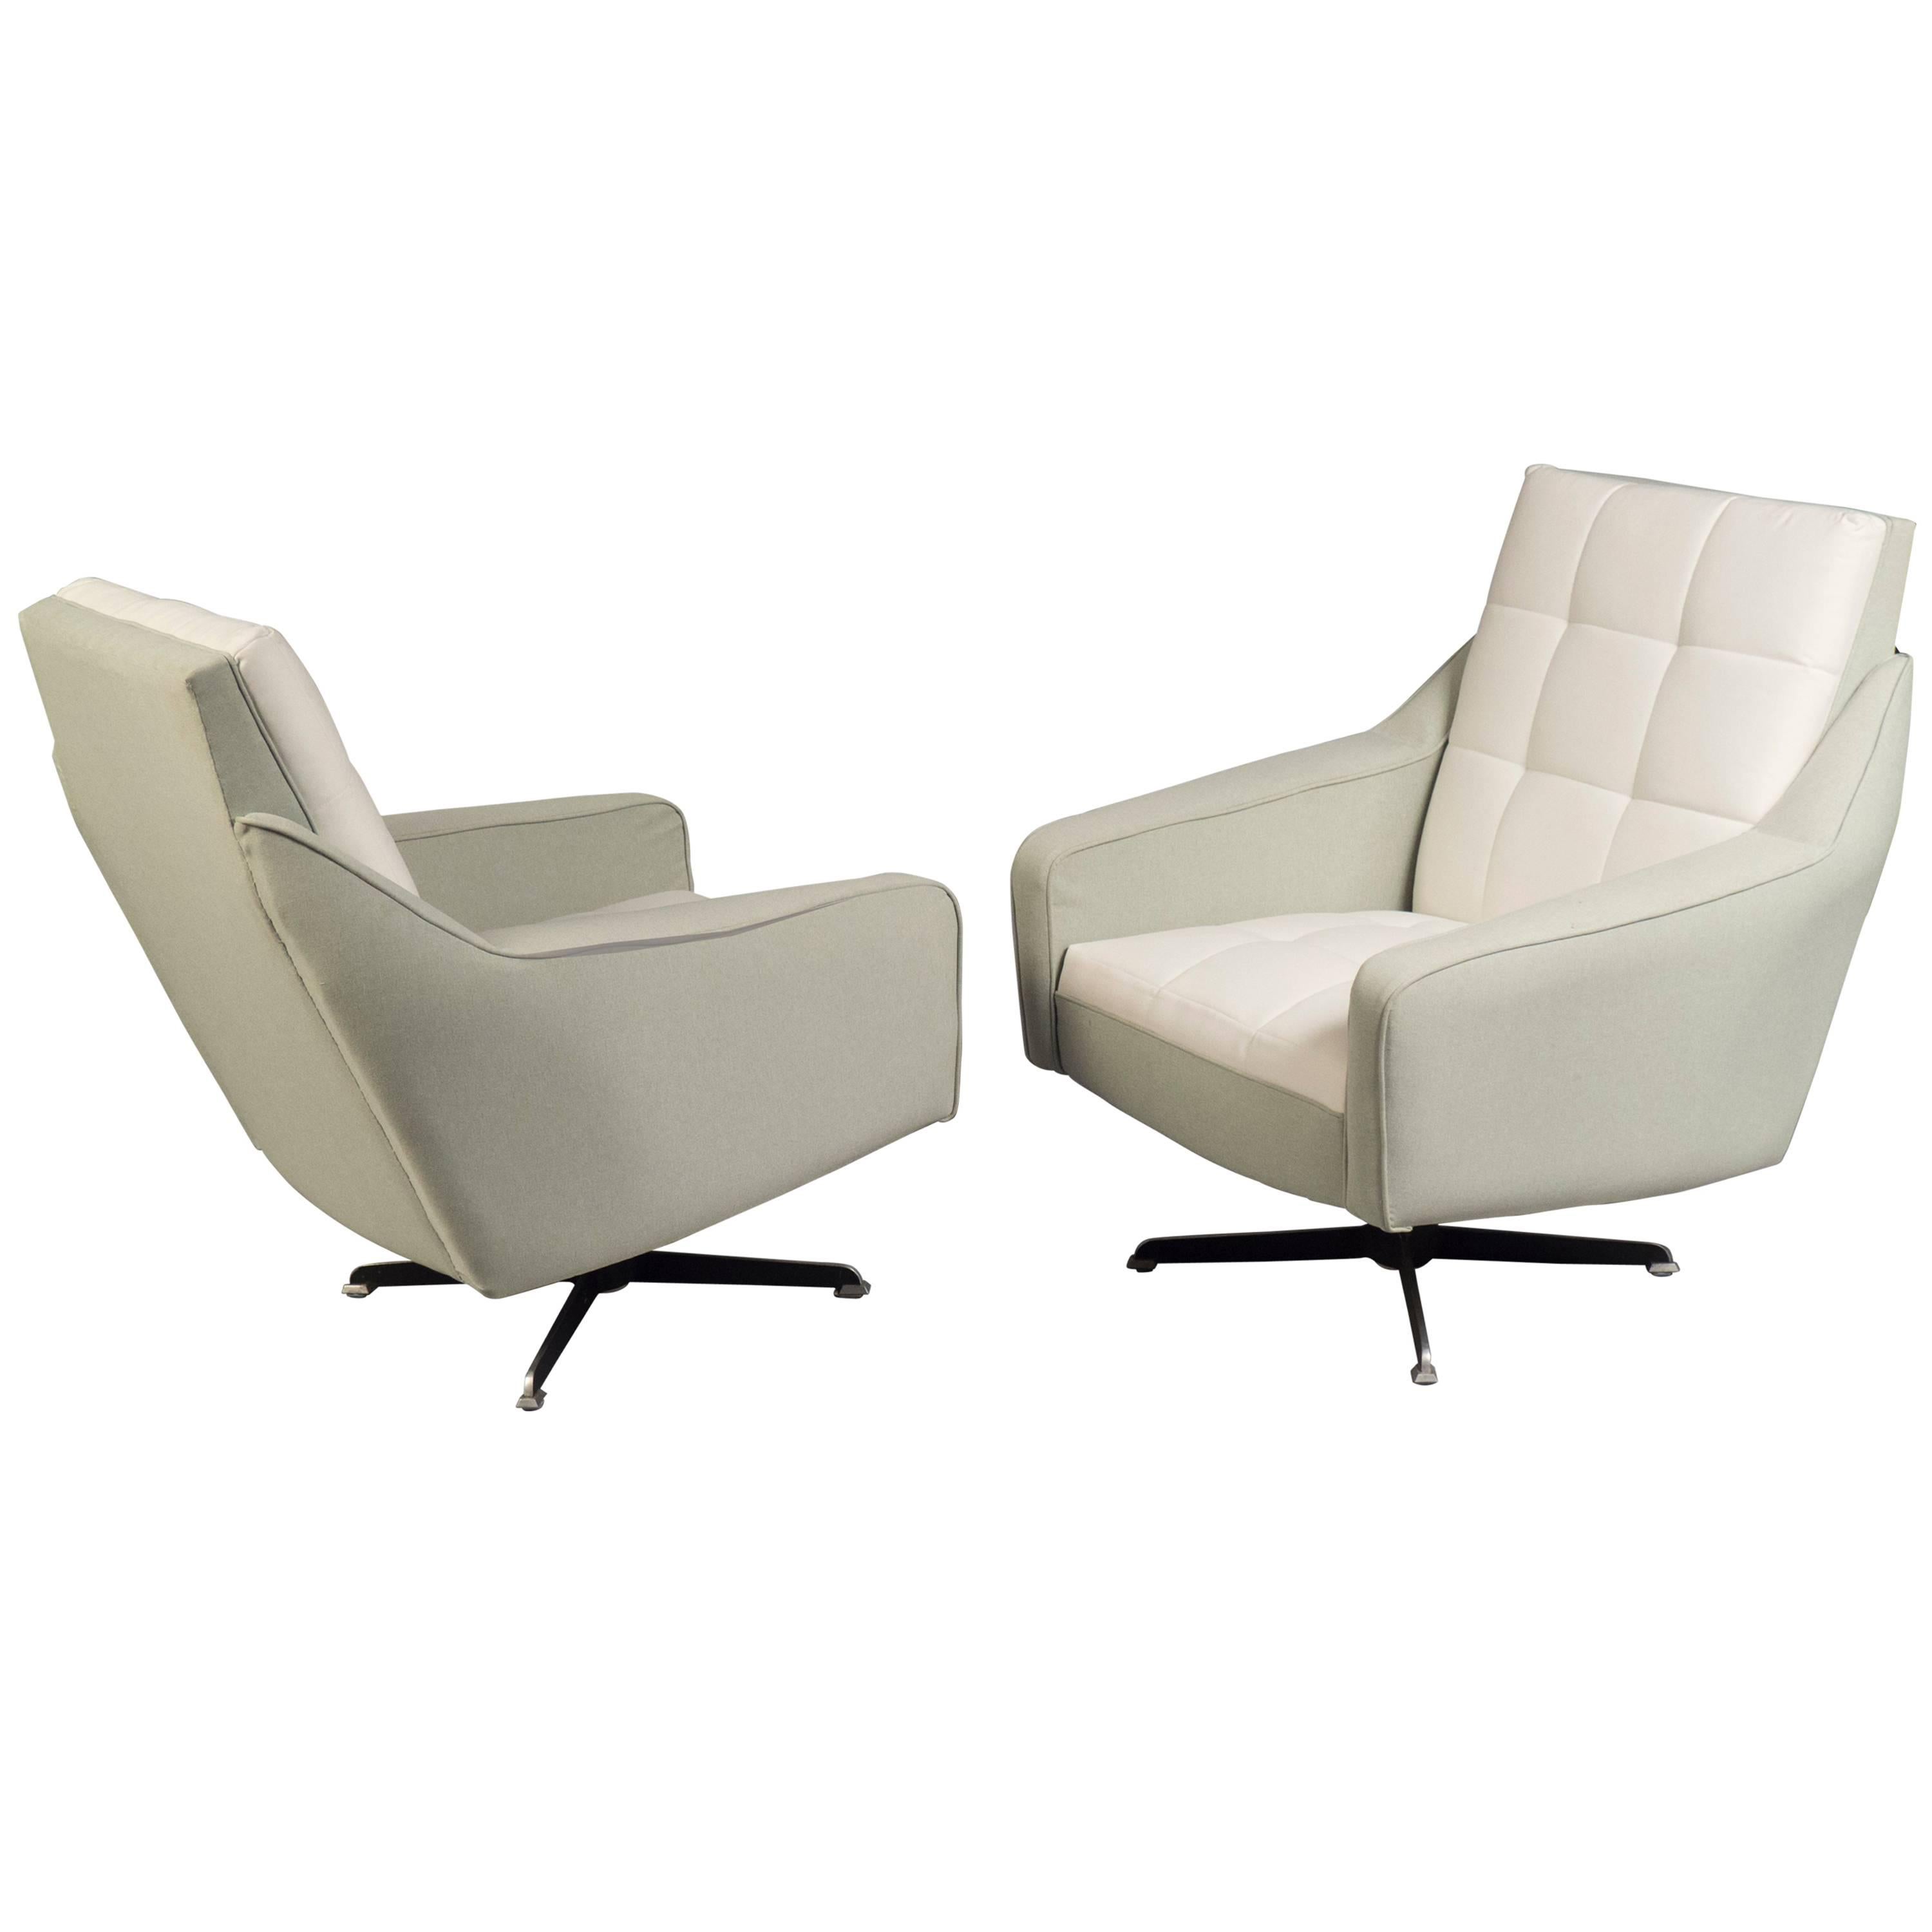 Pair of Swivel Chairs, Italy, 1970s